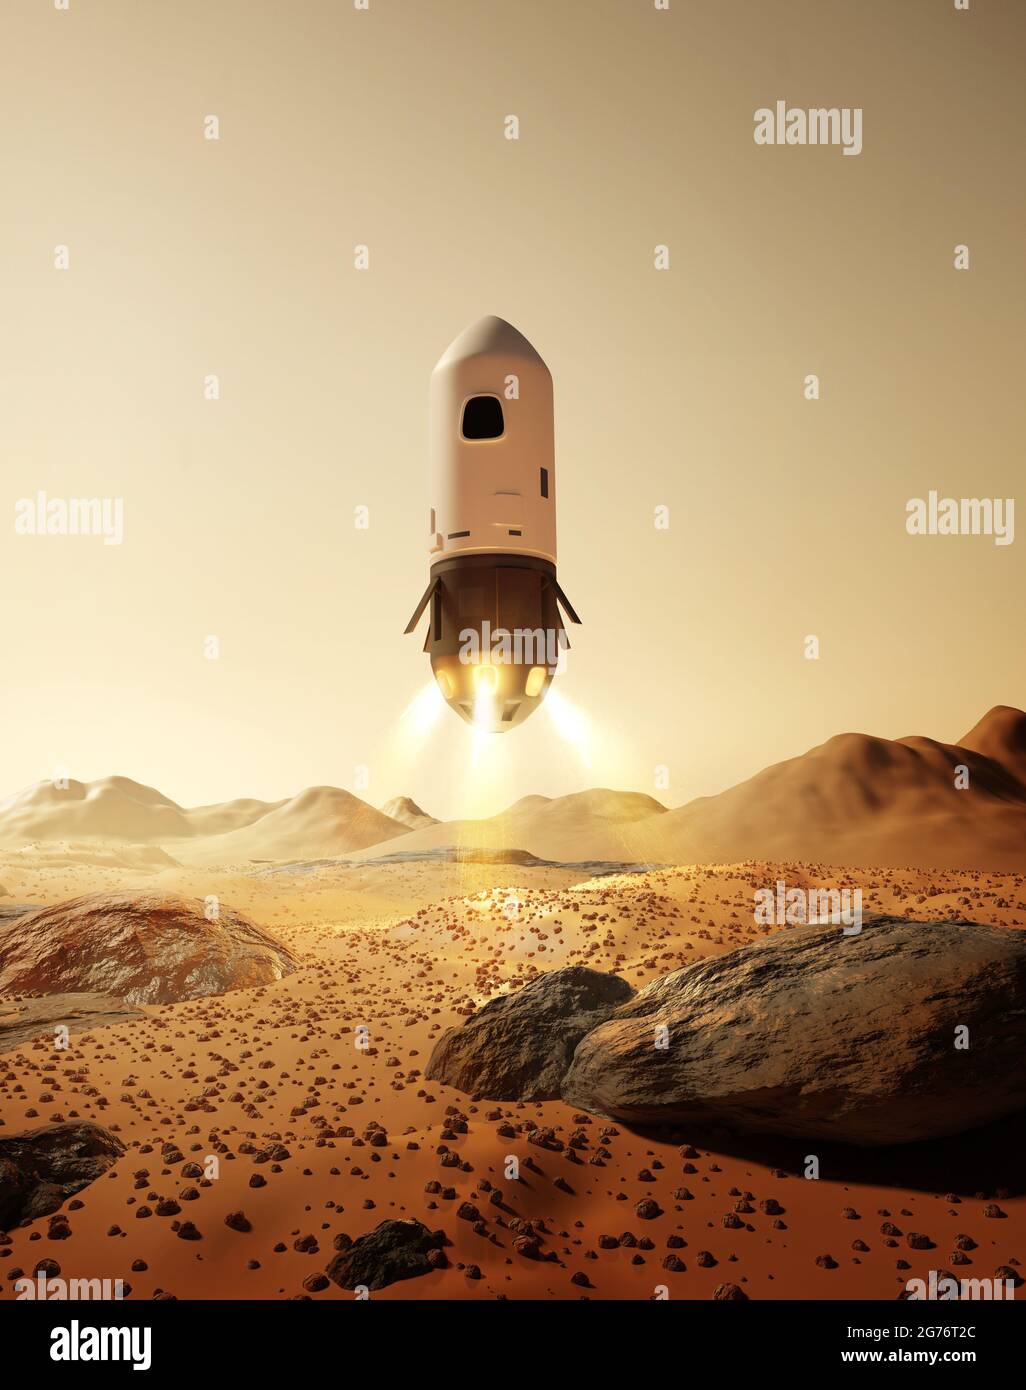 A rocket carrying astronauts landing on the surface of the planet Mars. Future space exploration missions. 3D illustration. Stock Photo